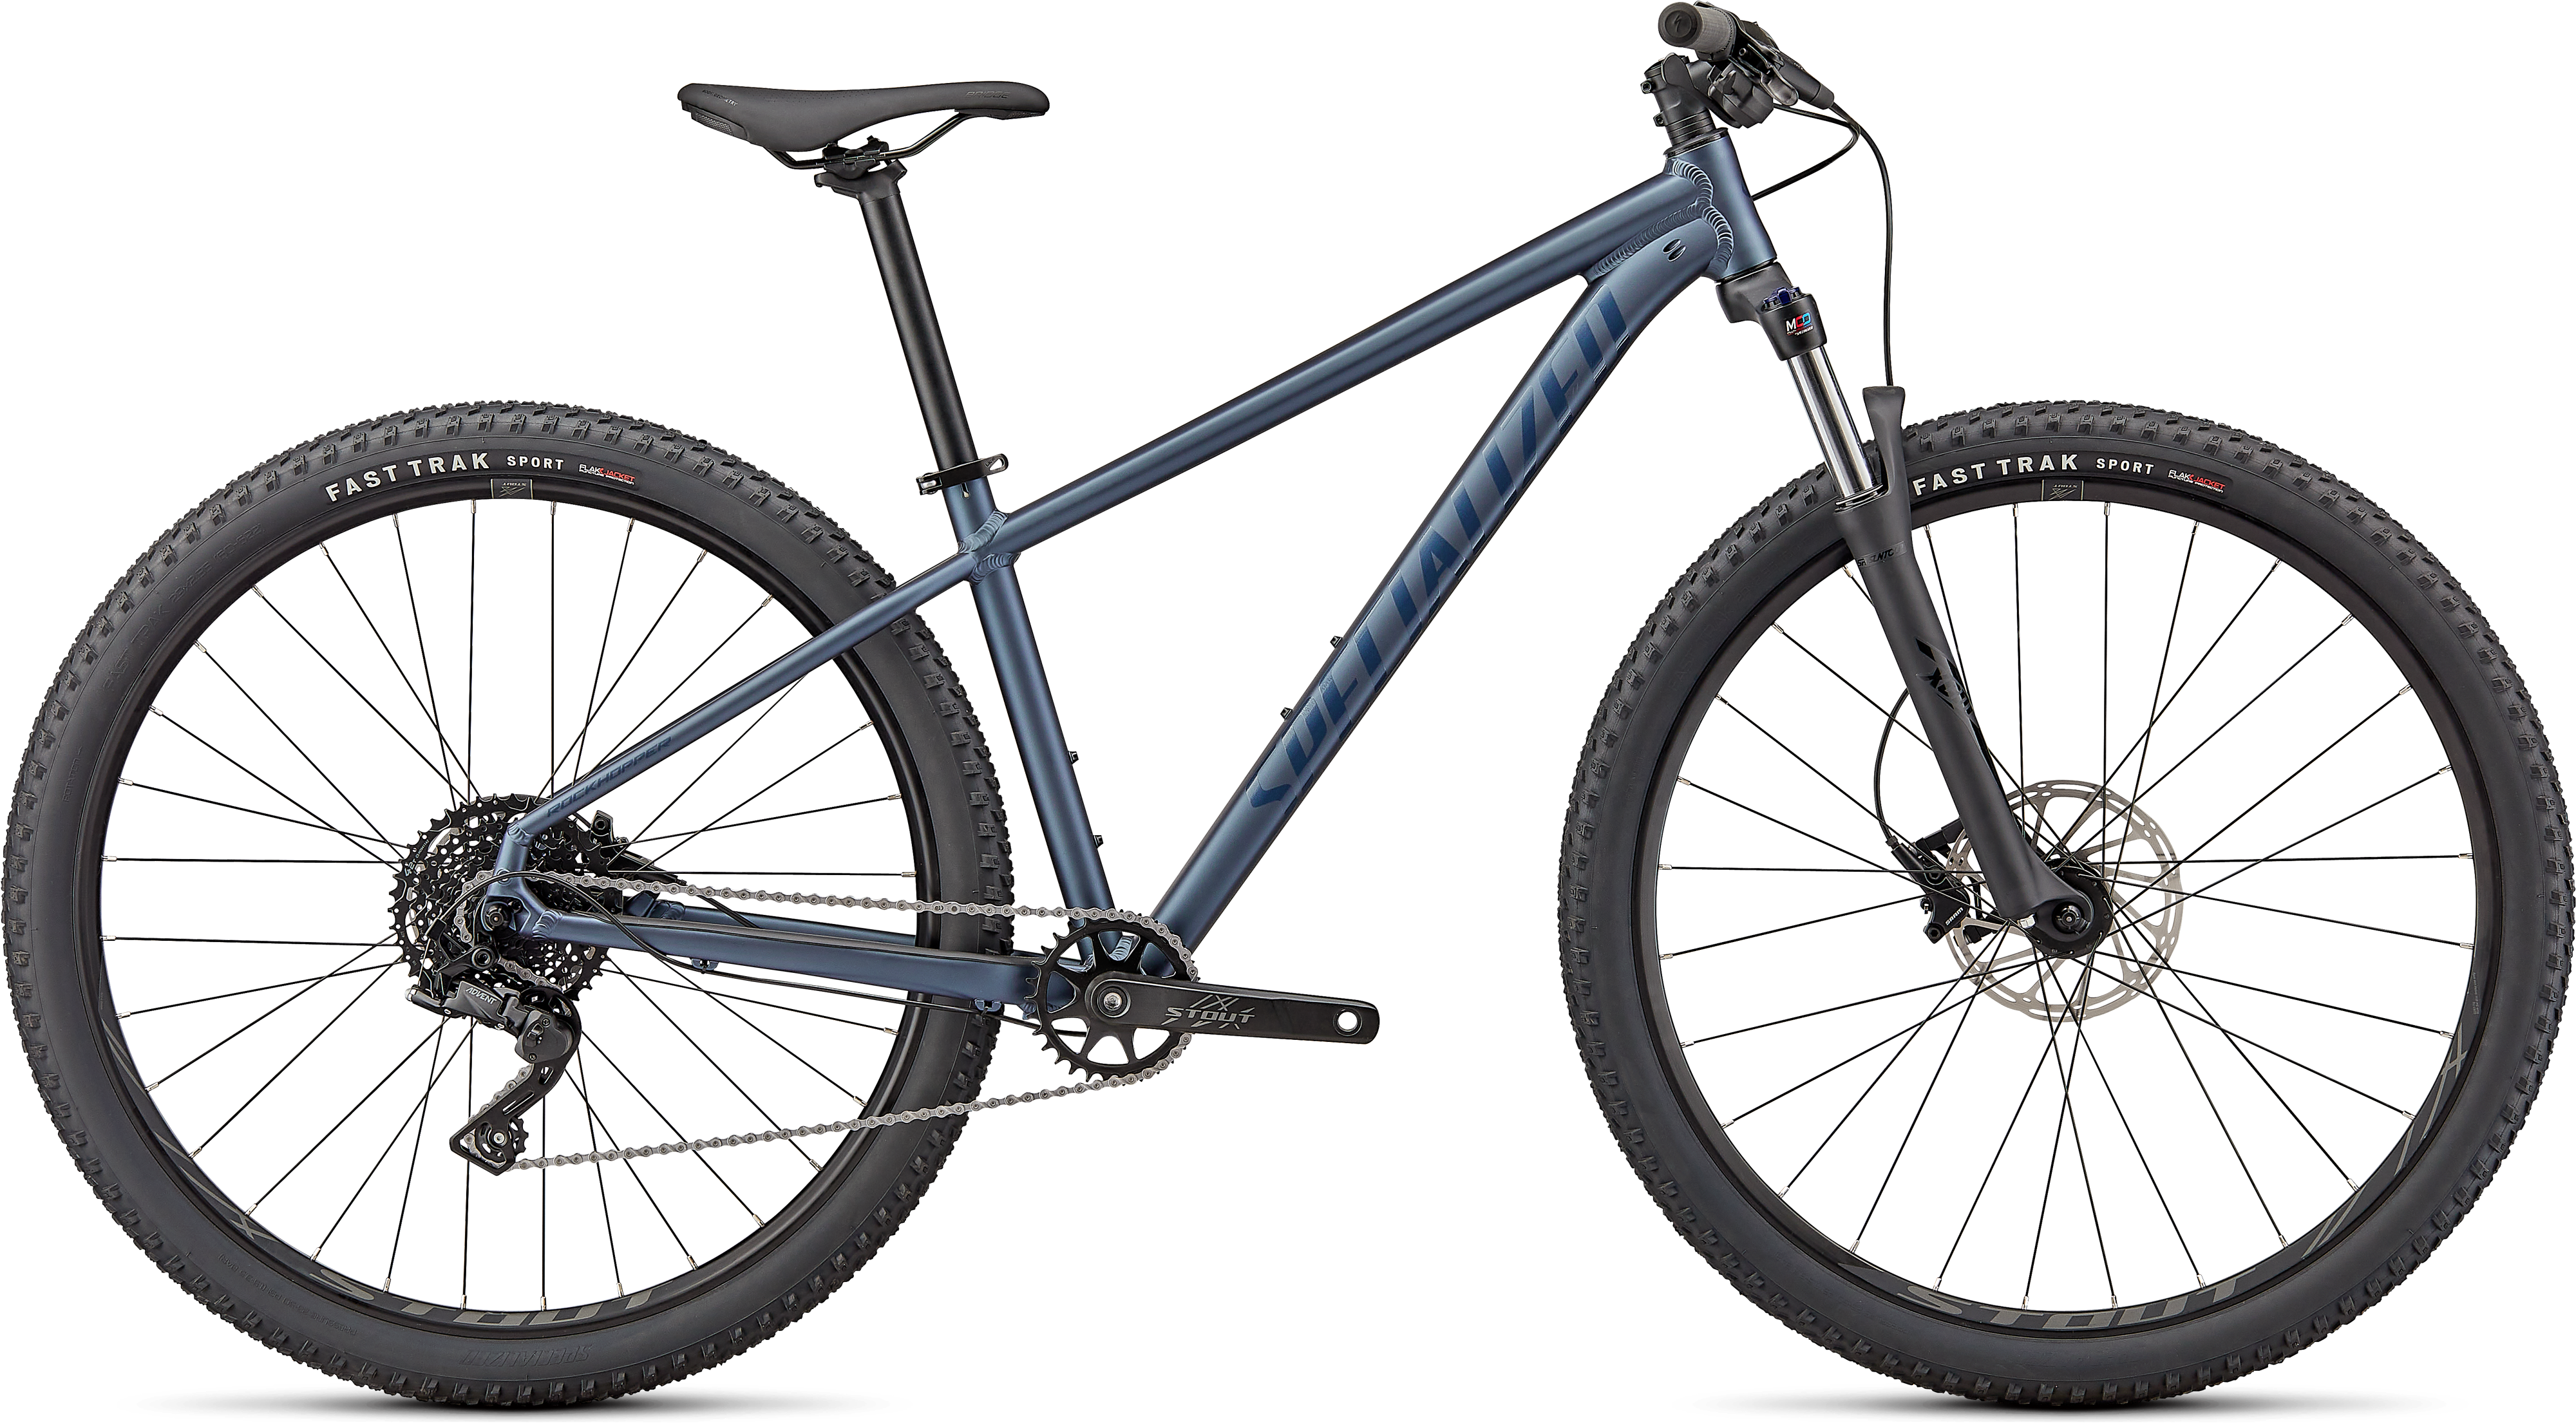 SPECIALIZED ROCKHOPPER SPORT 29 スペシャライズド ロックホッパー 